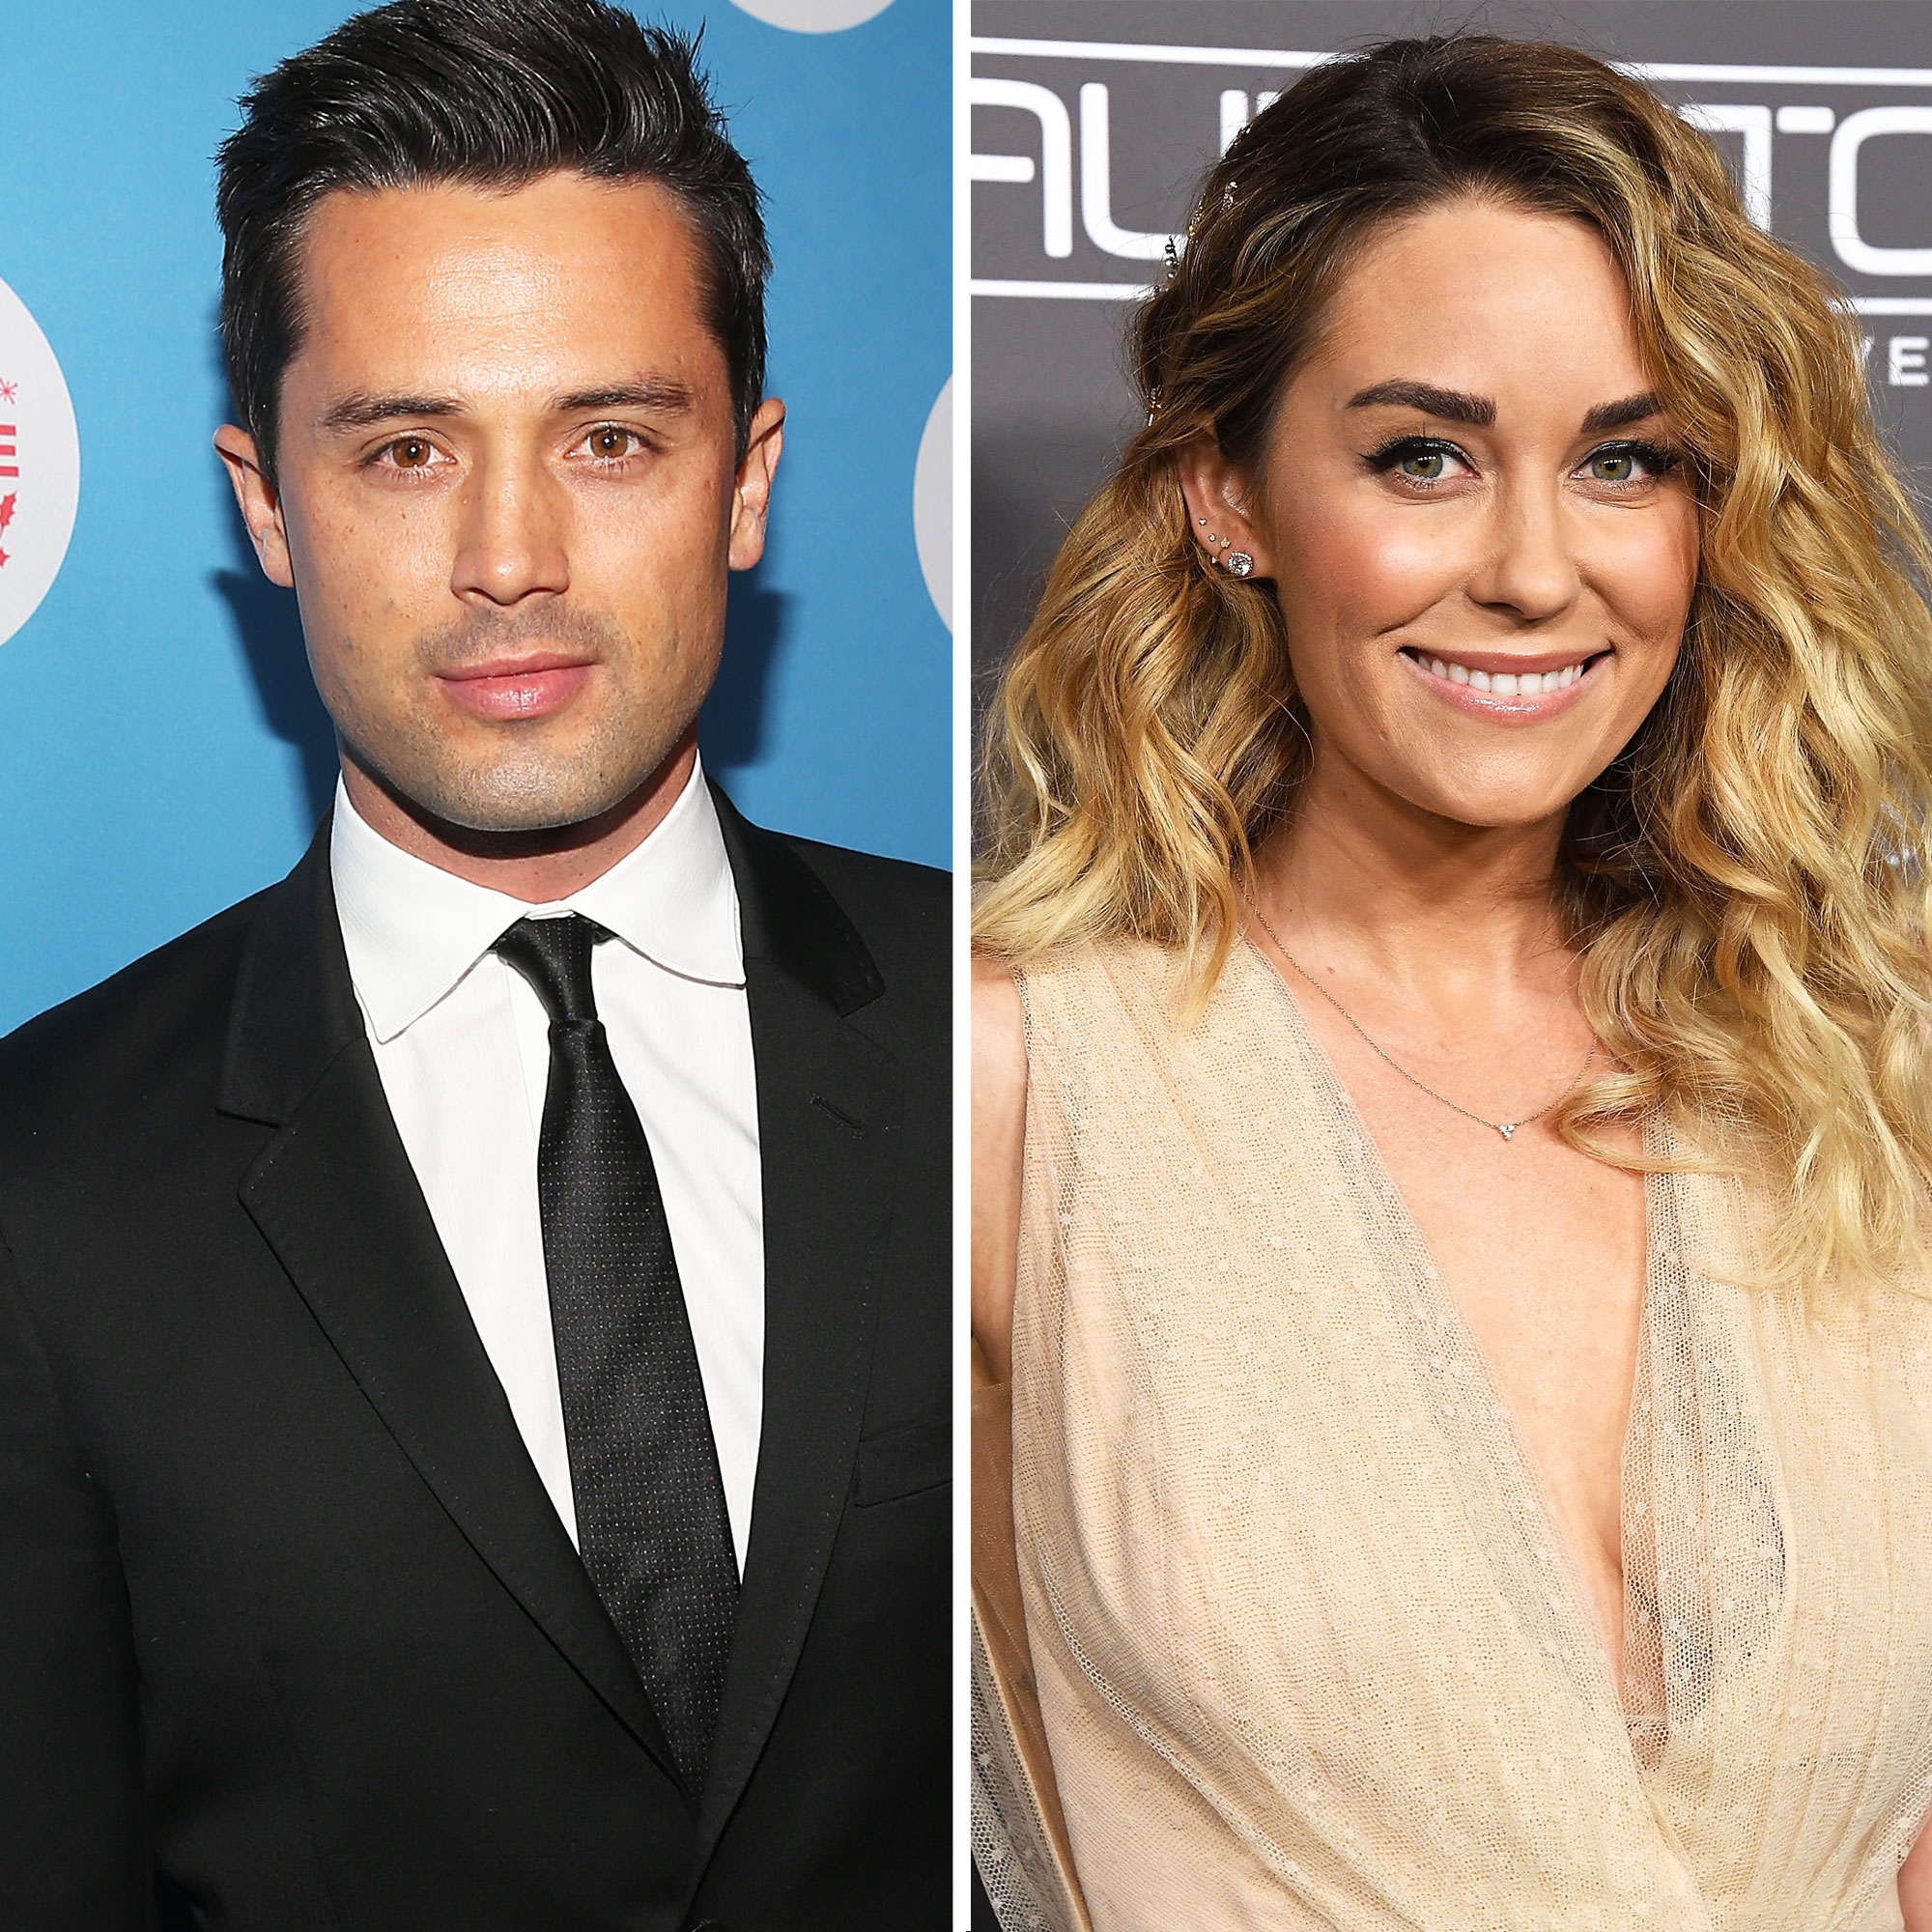 Lauren Conrad too busy with her clothing line to join 'The Hills' reboot